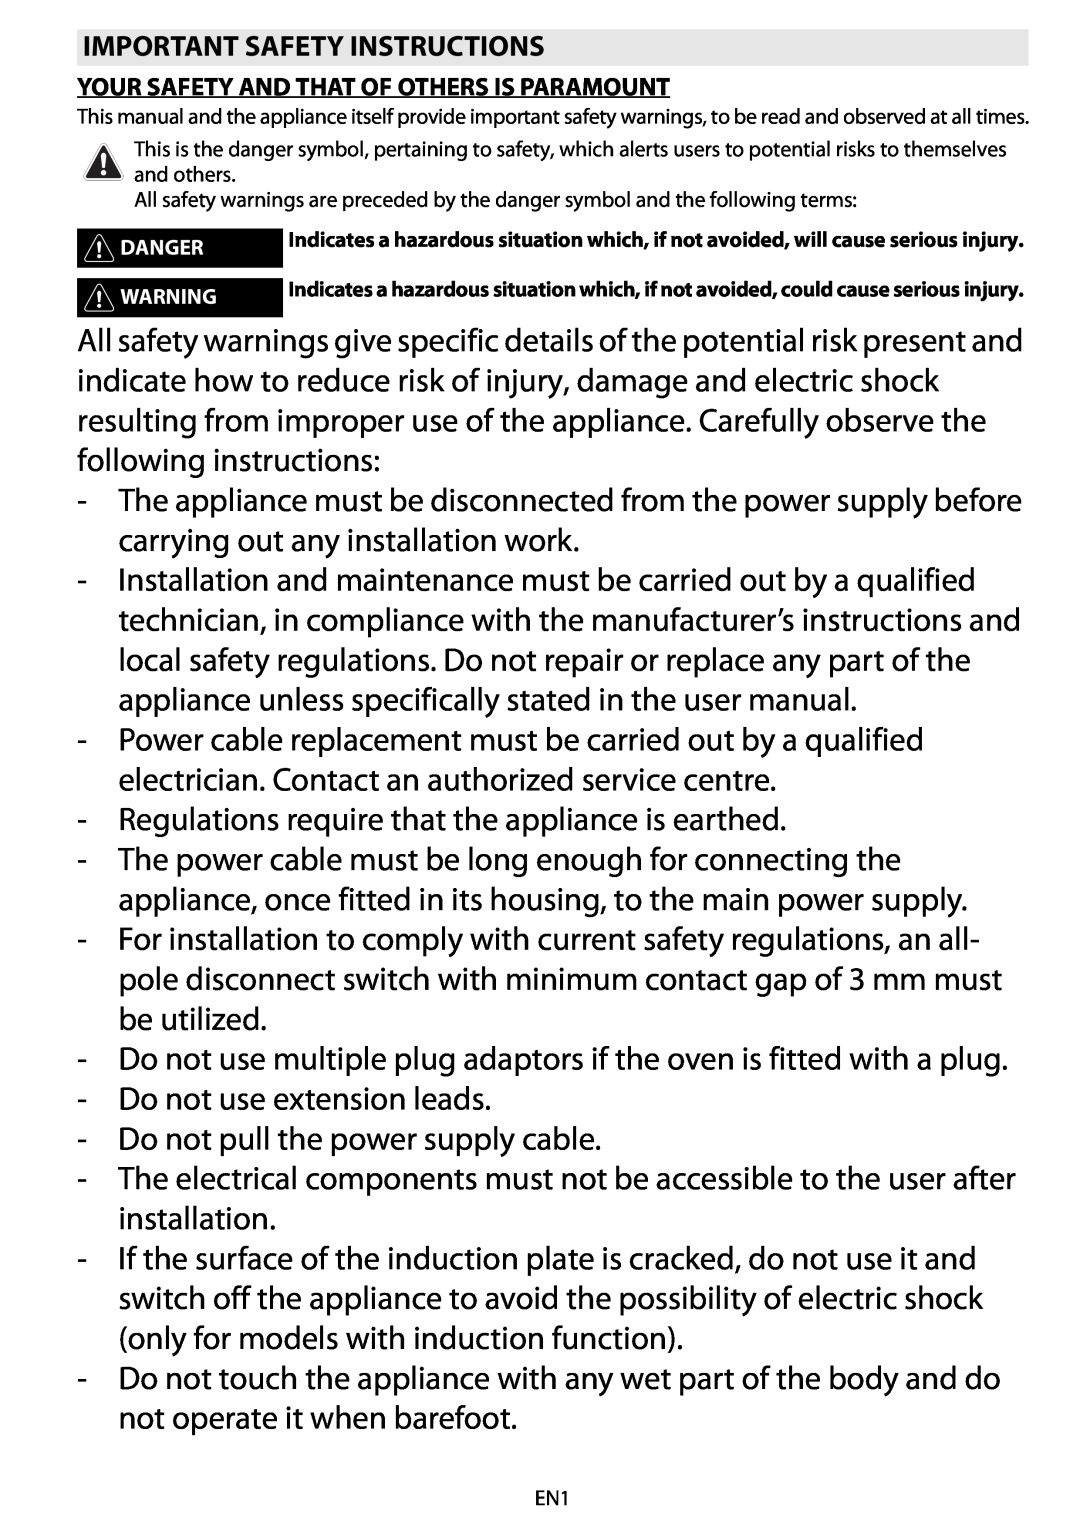 Whirlpool AKZM 654 manual Regulations require that the appliance is earthed 